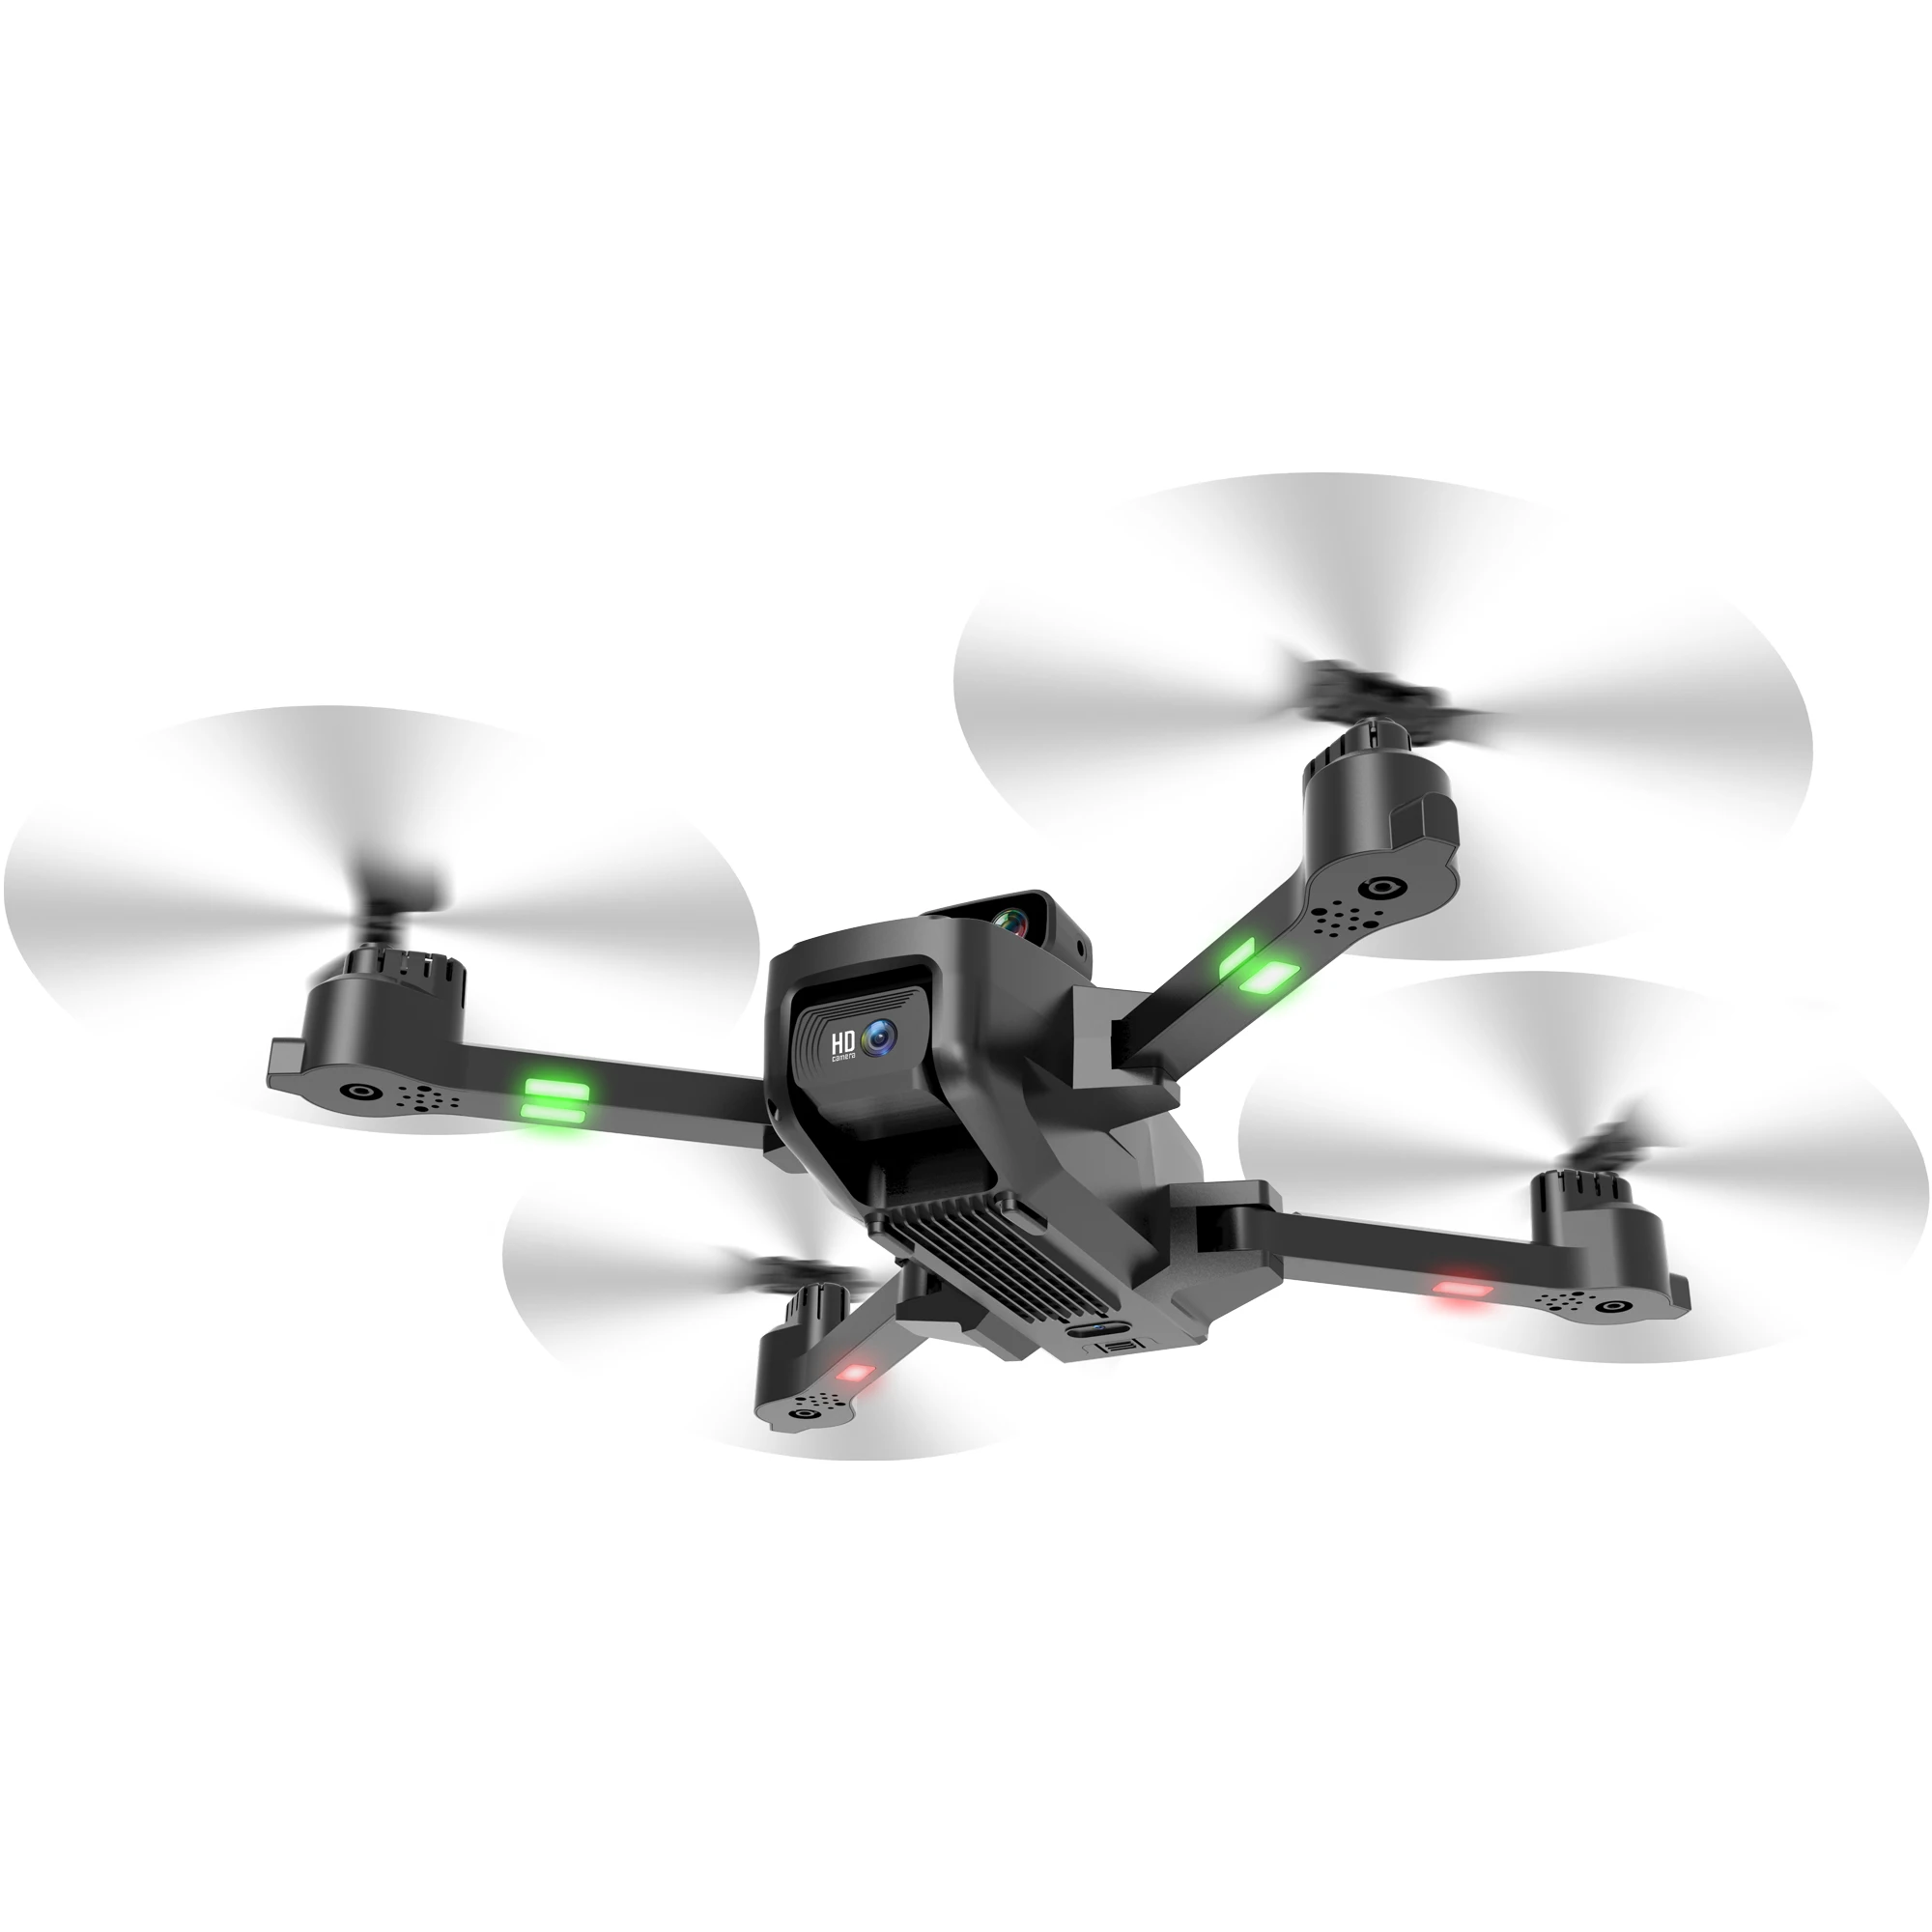 Flyxinsim China Factory S168 5g 4k,Folding Arm Drone Supplier,Cheap Camera Drones Best 4k Avaoidence - Buy Foldable Drone With 4k Camera,Drone Free Under 250 Gram Product on Alibaba.com